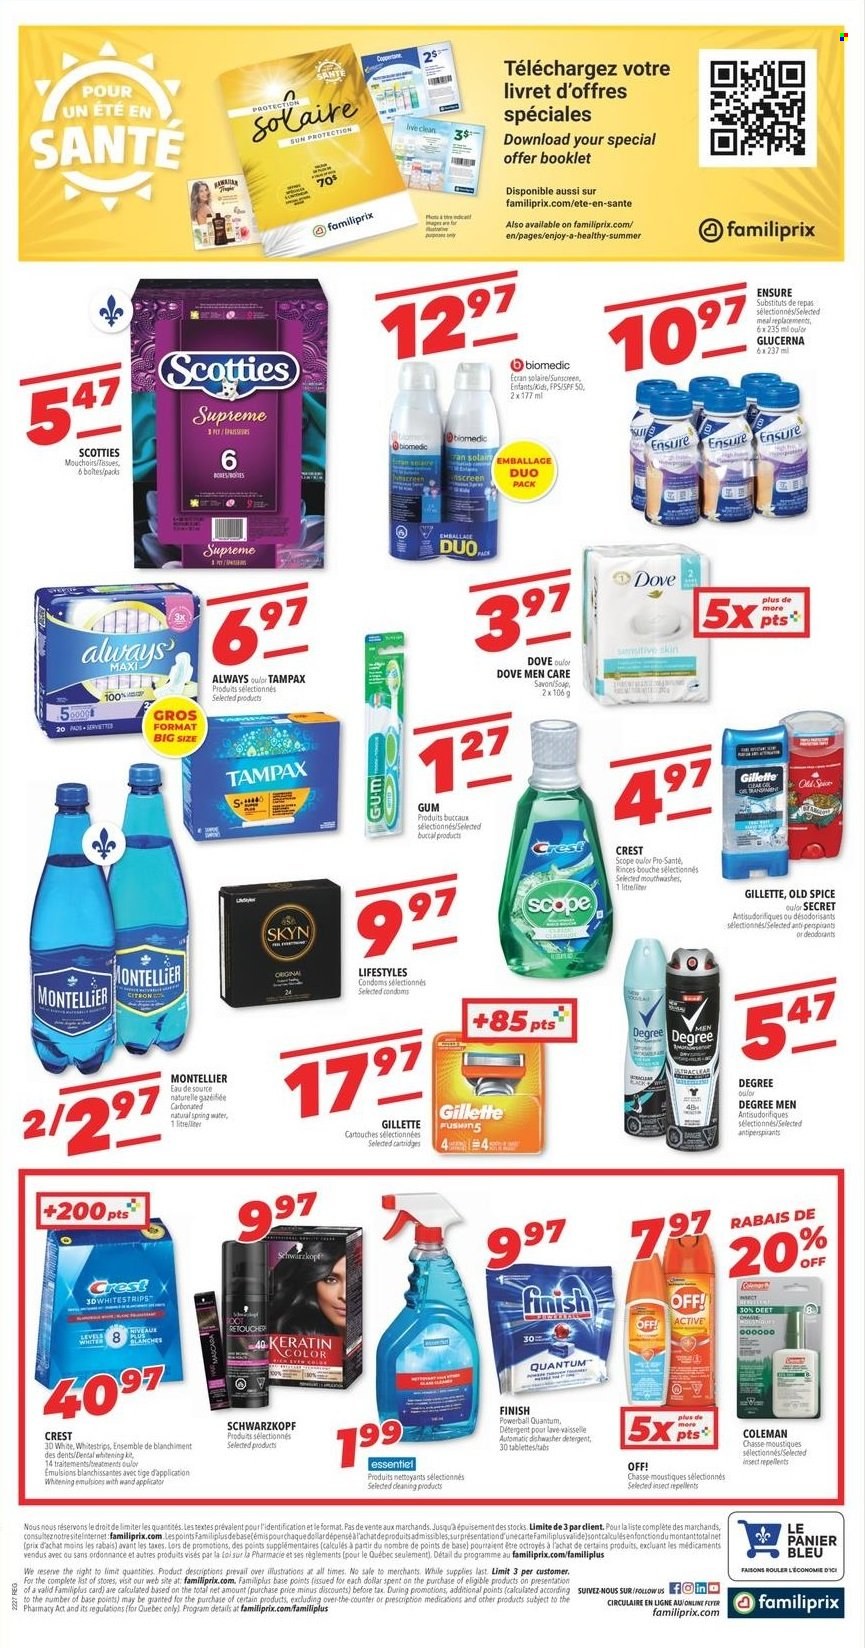 thumbnail - Familiprix Flyer - June 30, 2022 - July 06, 2022 - Sales products - soup, spice, spring water, tissues, Finish Powerball, Crest, Gillette, keratin, Glucerna, detergent, Dove, Tampax, Old Spice, Schwarzkopf, deodorant. Page 6.